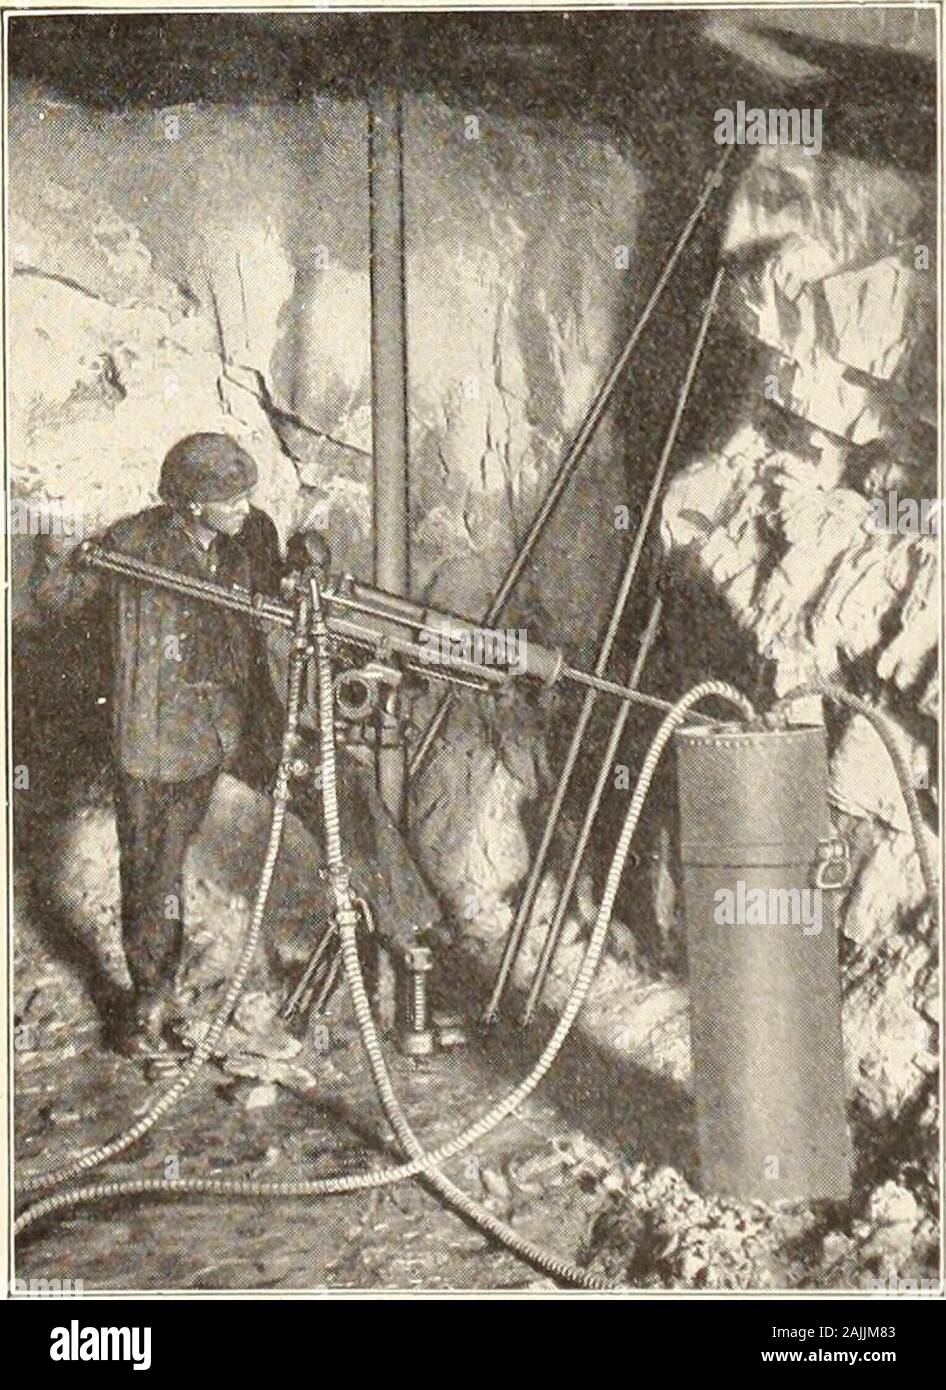 Canadian mining journal July-December 1915 . n Union, A. B. C. (4th and 5th Edition.I. A.I., Liebert and Print*. Sullivan Water-Jet Drills Will get the hole in and the cuttings out quickest FOR DRIFTING, tunneling and other holes at or nearthe horizontal, vou can increase vour drilling speed 2r&gt; to HH&gt;per cent by employing SULLIVAN WATER - J E 1DRILLS. These machines are fitted with hollow pistons, and UKhollow steel. Water and compressed air are forced throughthe piston and steel to the bottom of the hole, throwing; outthe cuttings, preventing sticking of bits, and affording a cleandril Stock Photo